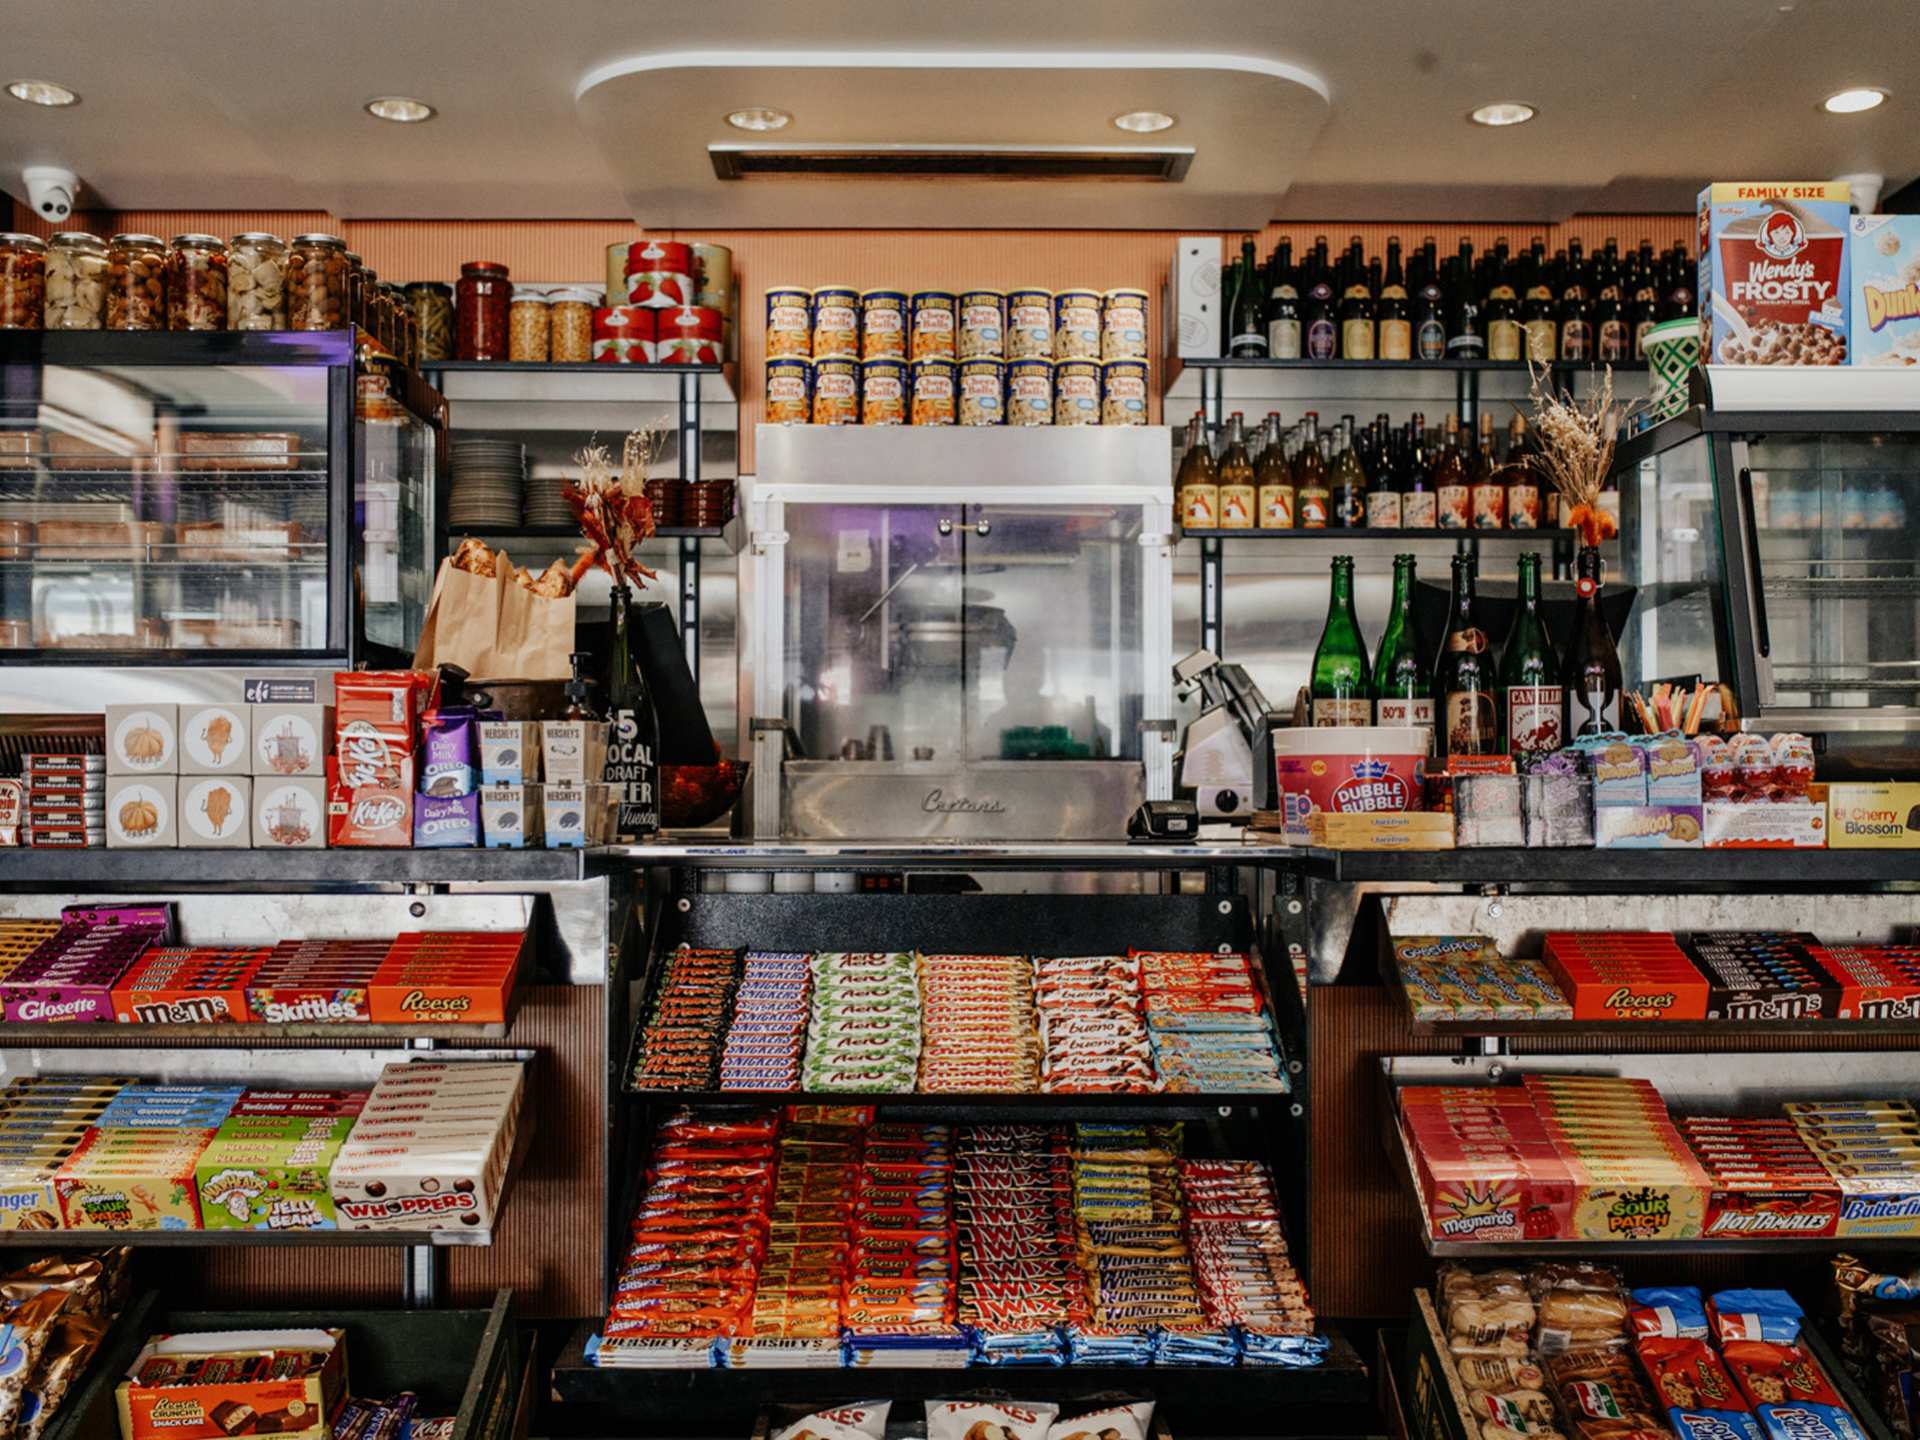 Toronto bottle shops and alcohol stores | Concession counter with candy and speciality products at Bottega Volo in Littly Italy, Toronto